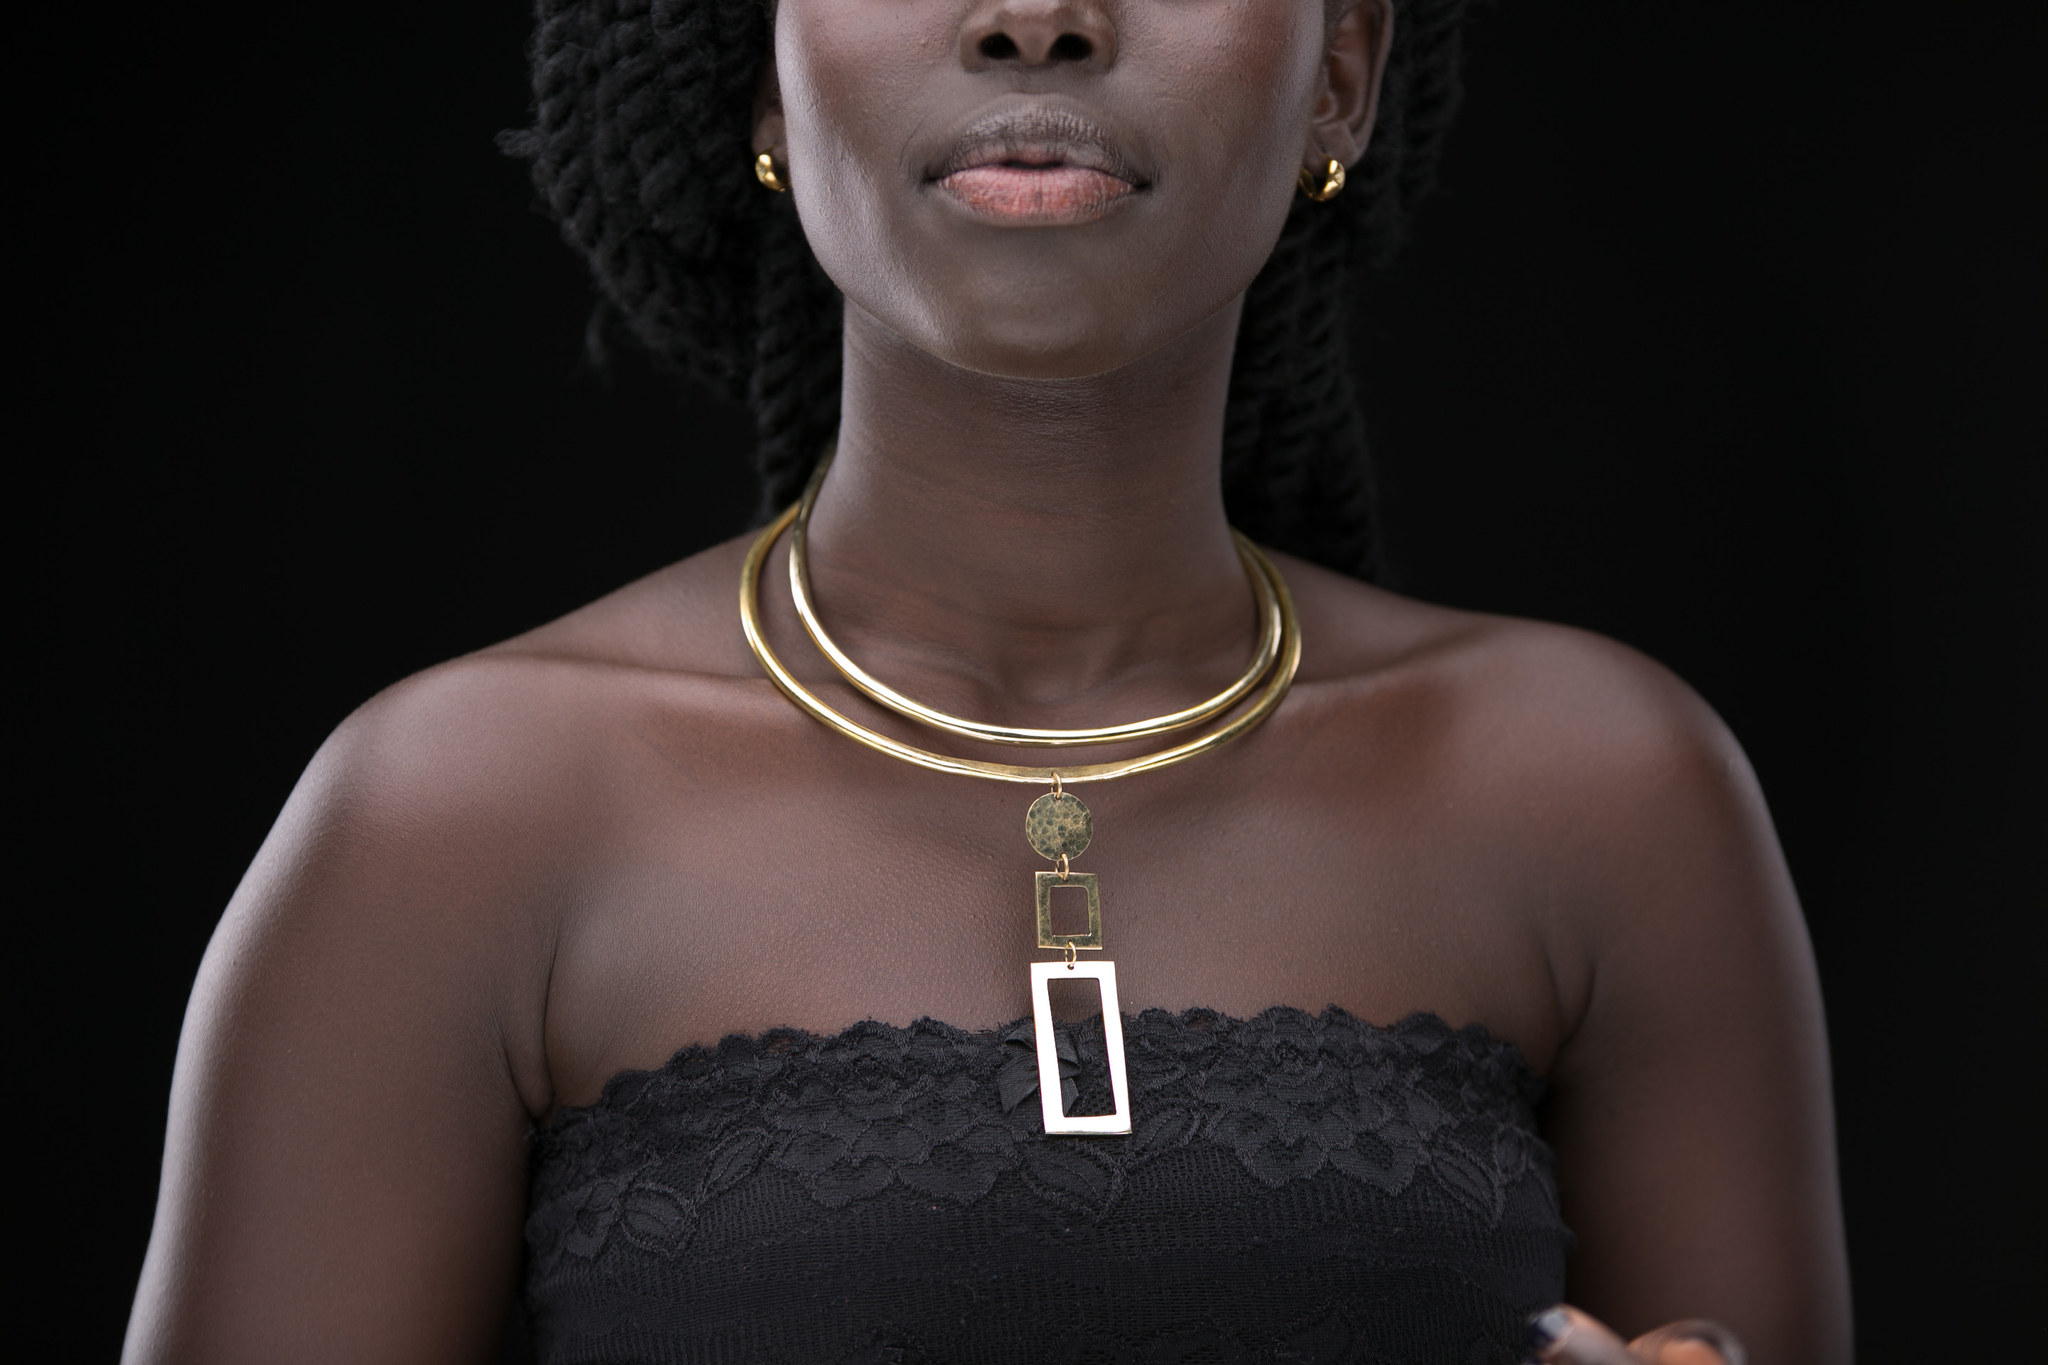 Classy Brass Neckpiece - Authentic African handicrafts | Clothing, bags, painting, toys & more - CULTURE HUB by Muthoni Unchained